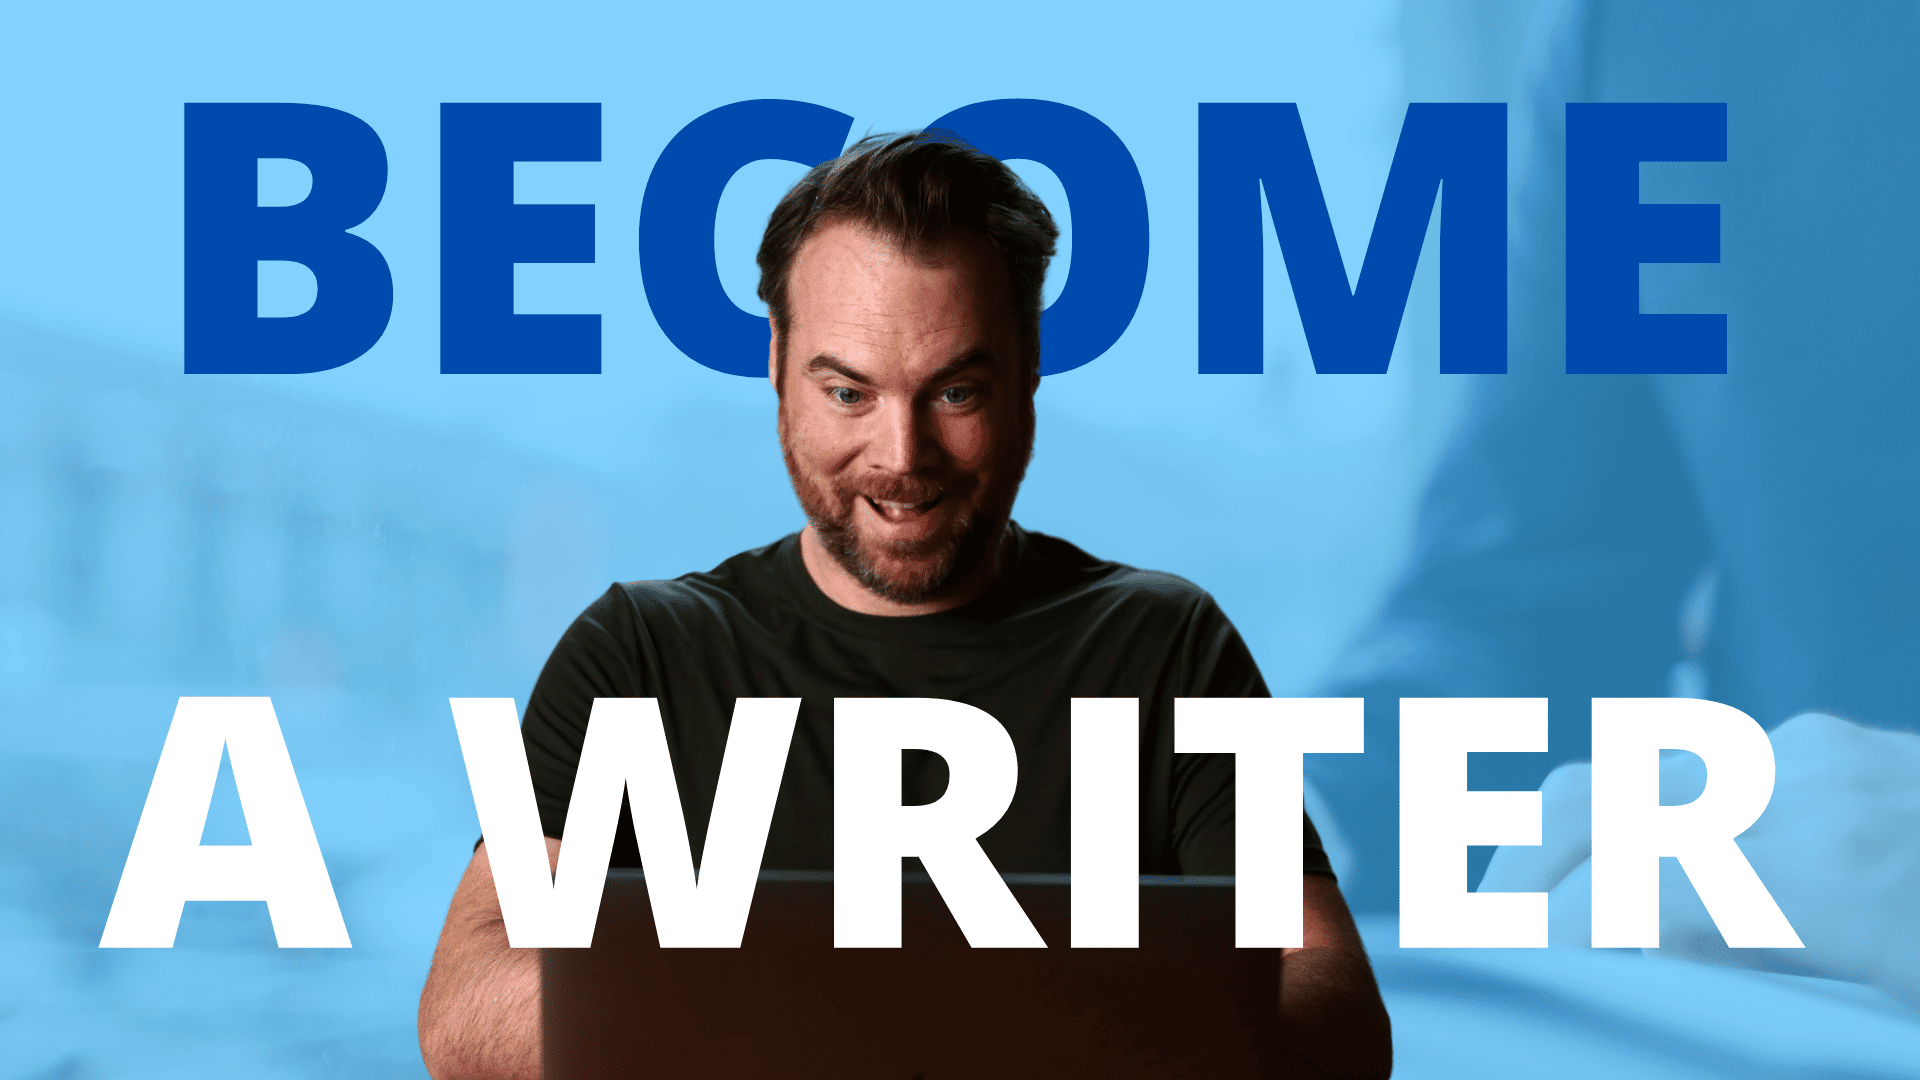 How to Become a Writer: 10 Easy Steps to Follow